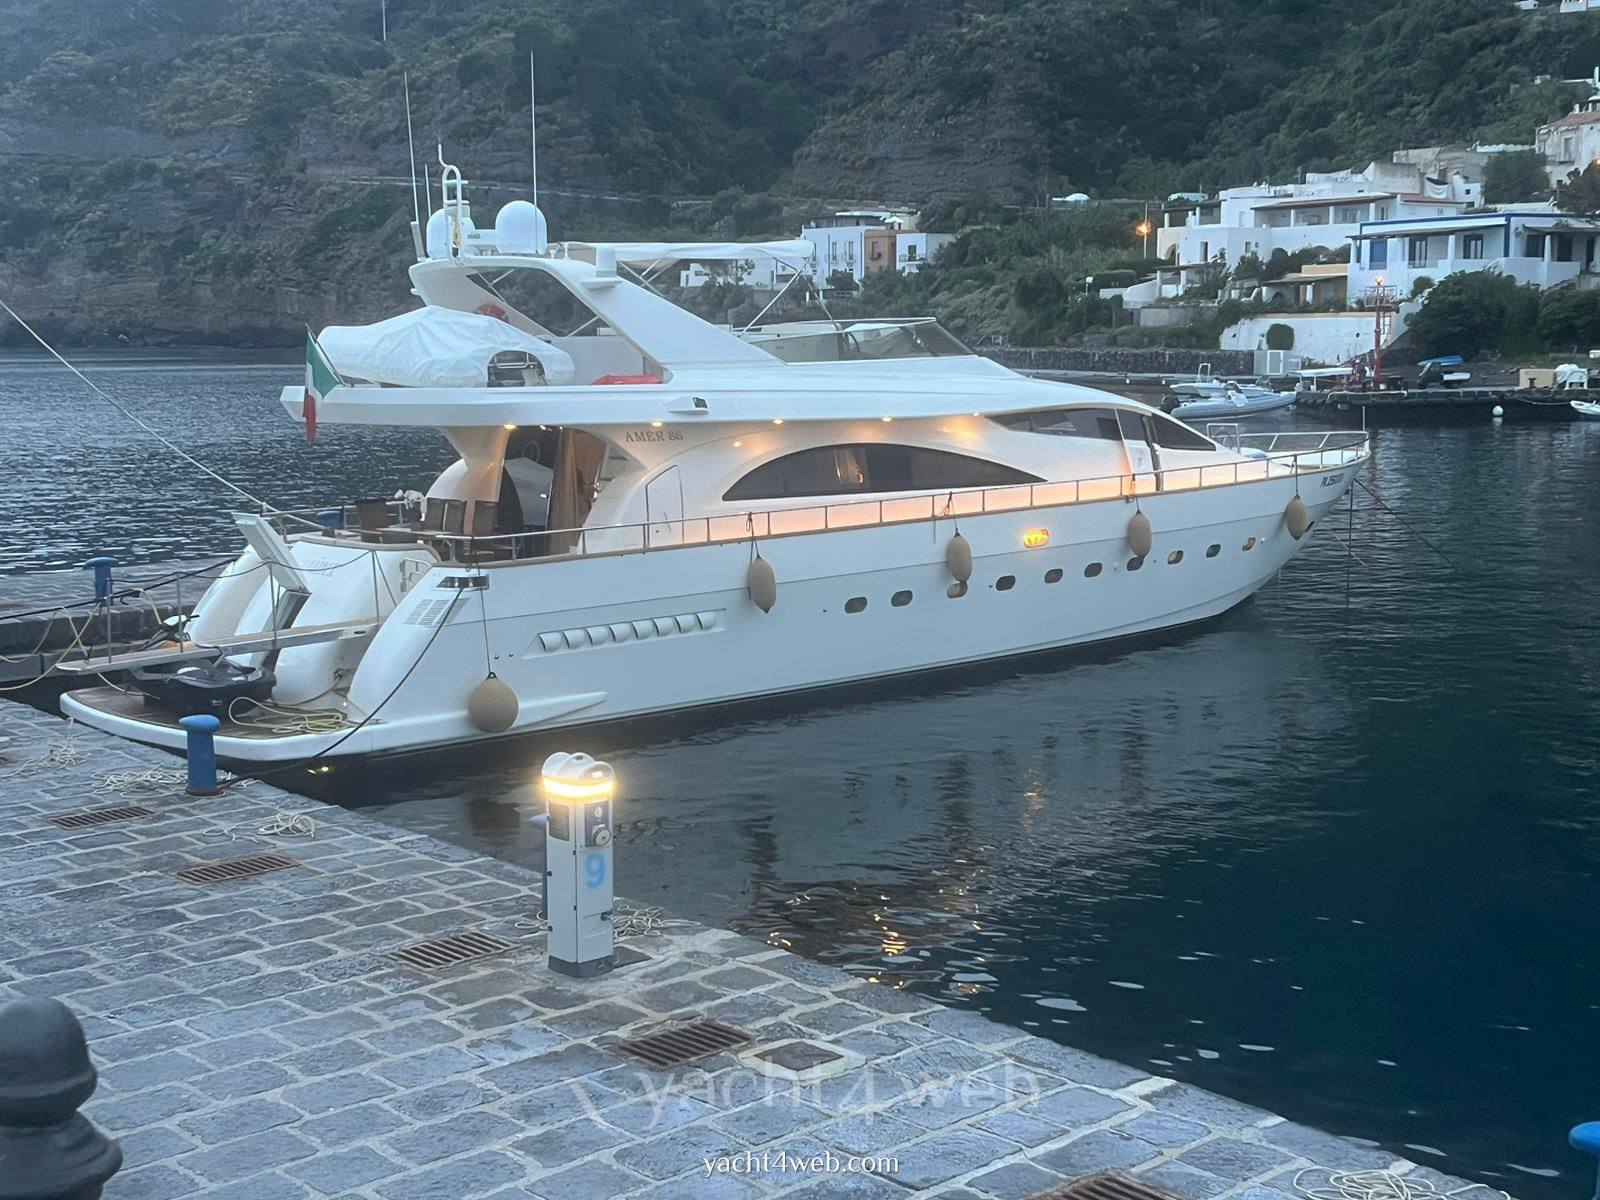 PerMare Amer 86 Motor boat used for sale